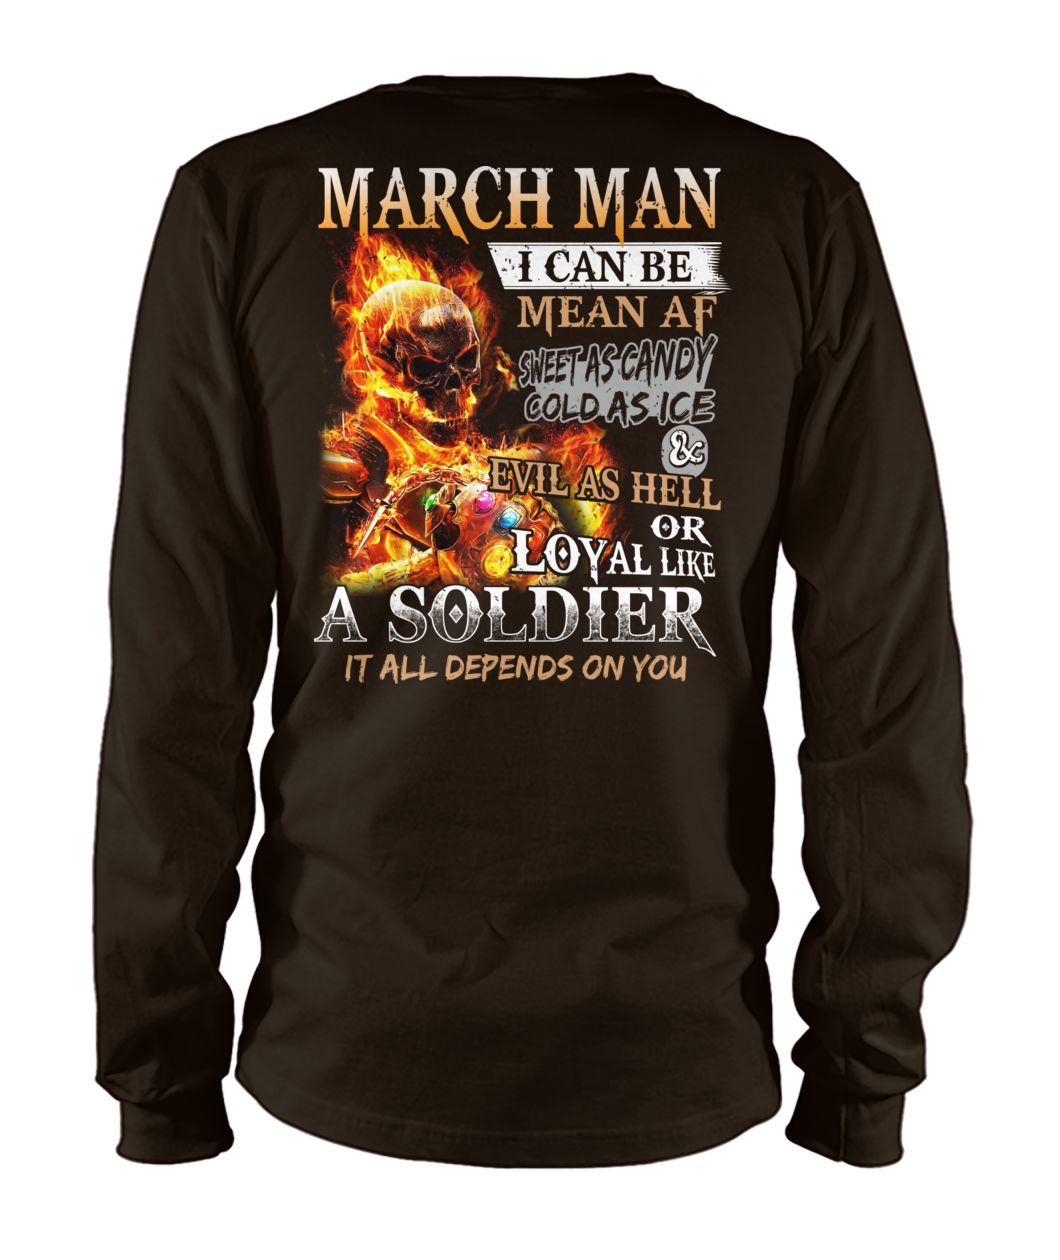 March man I can be mean af sweet as candy gold as ice and evil as hell unisex long sleeve